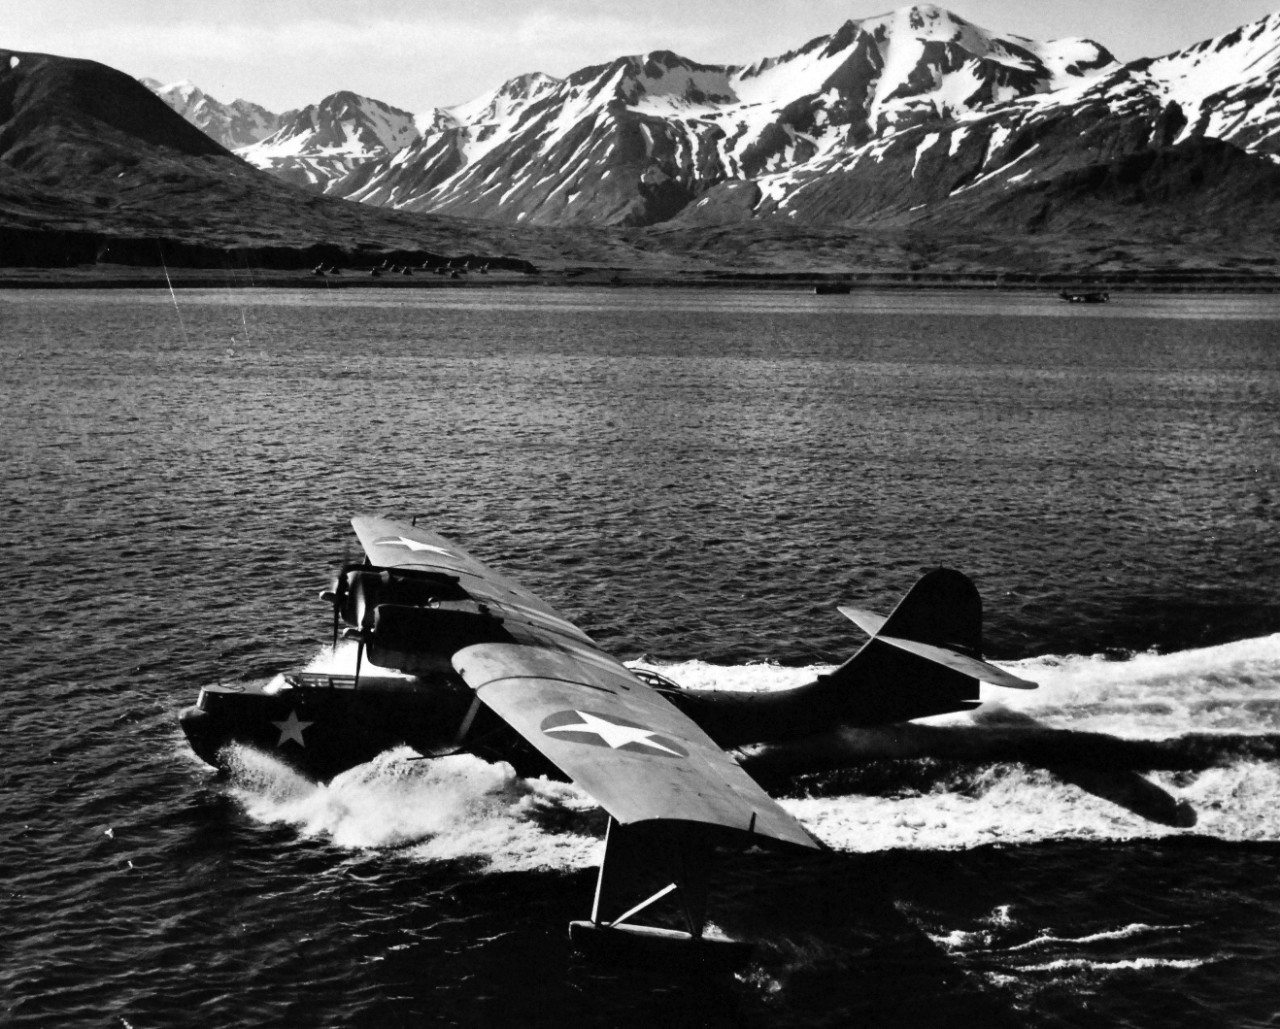 80-G-475723:   PBY-5 “Catalina” patrol bomber, July 1943.   PBY-5 returns from patrol flight to harbor at Attu in Aleutian where its mother ship is anchored. Photographed by Lieutenant Horace Bristol, July 1943.  TR-4213.   U.S. Navy photograph, now in the collections of the National Archives.  (2015/11/17).